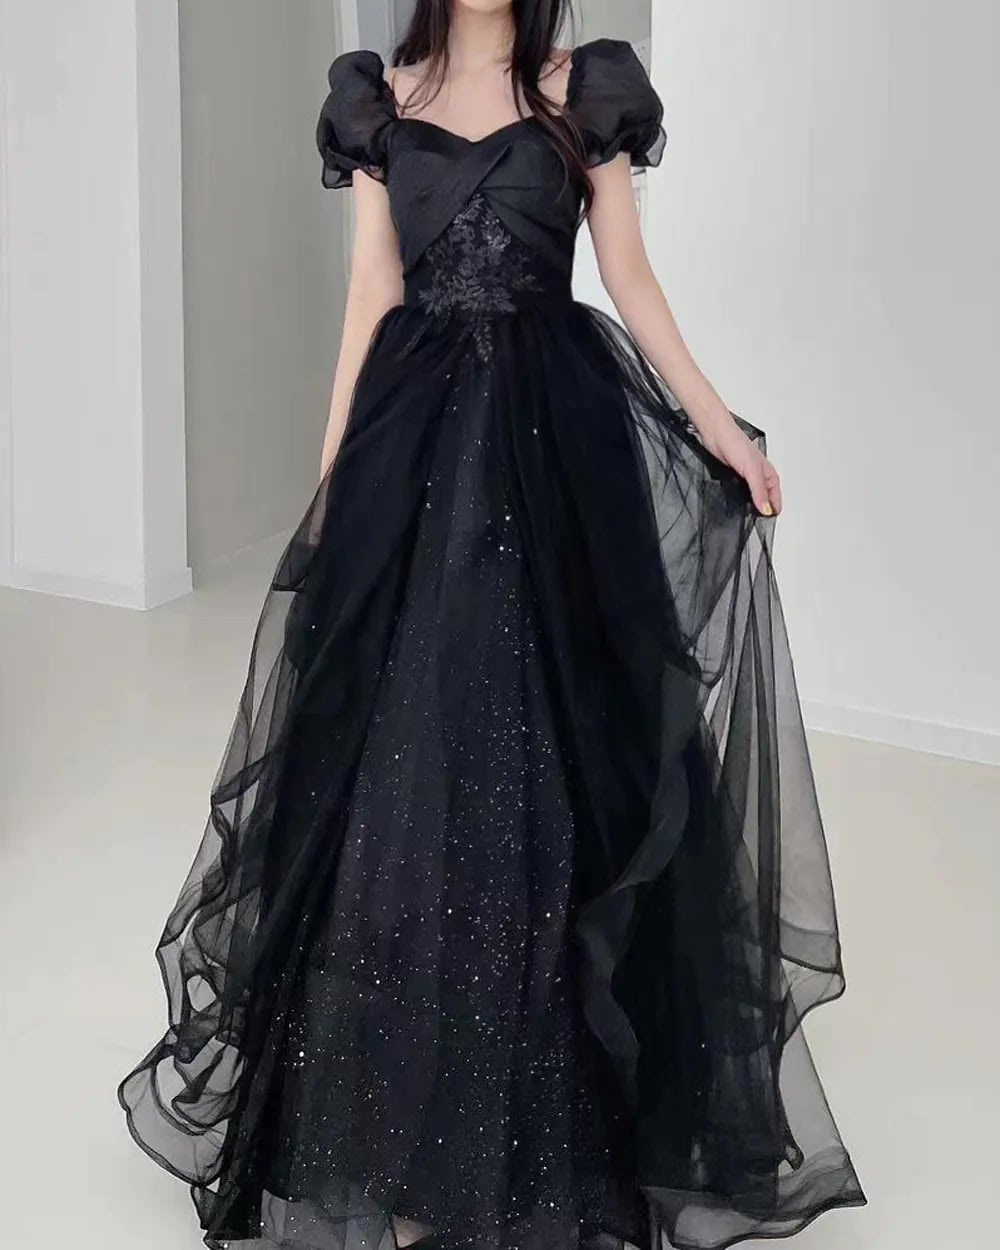 Black Chiffon Birthday Party Prom Dress Cocktail Evening Ball Gown ...